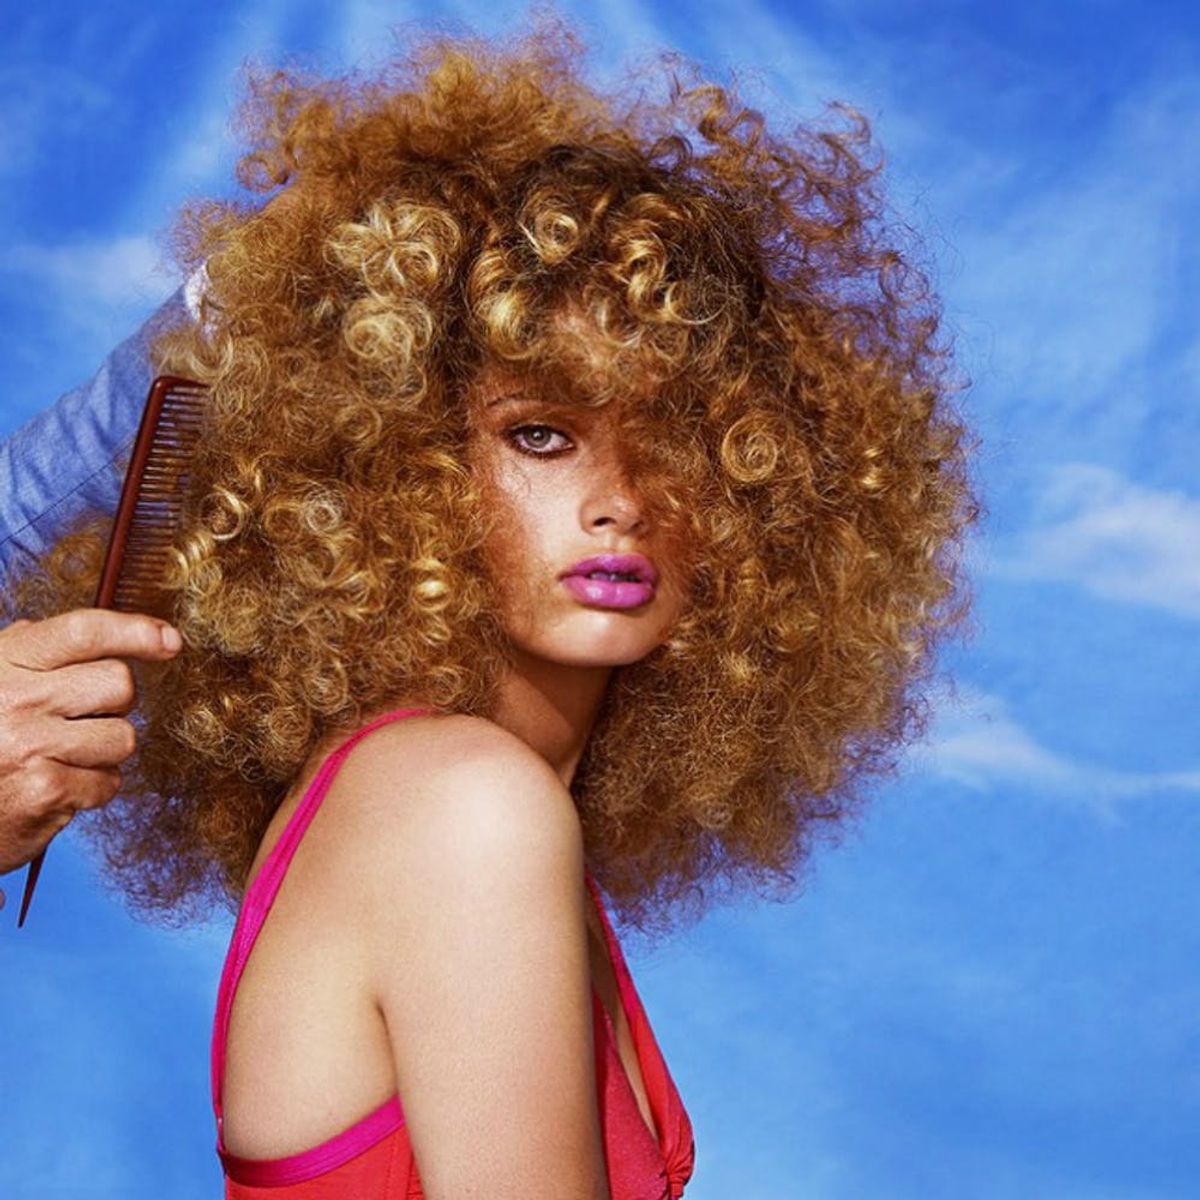 11 Hair Instagrams to Inspire Your NYE ‘Do